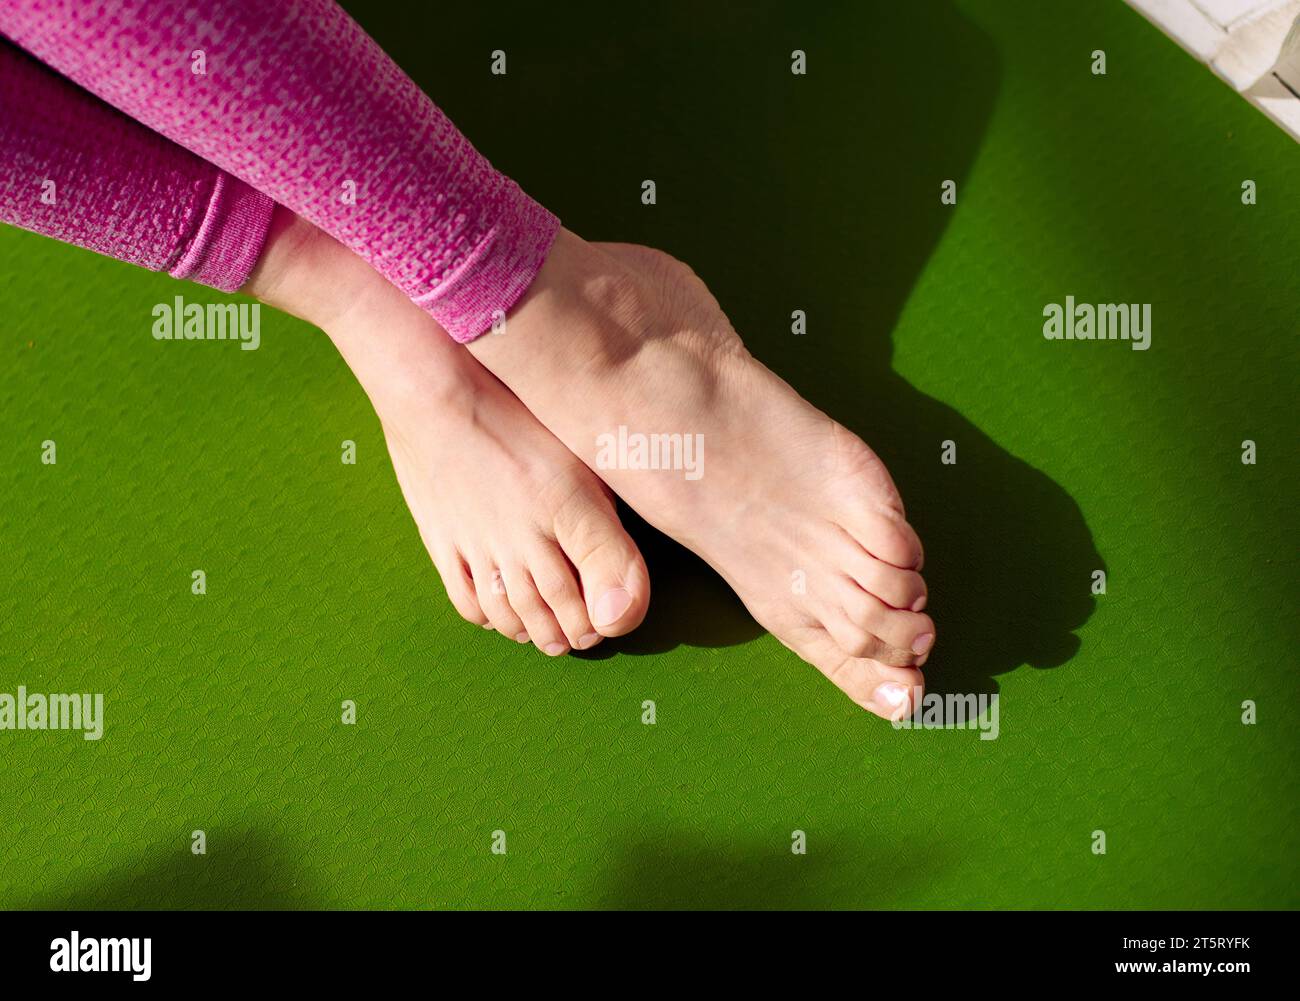 After receiving a massage to ease muscle stress, a woman's feet are relaxing on a green yoga mat.  Reducing muscle soreness, increasing blood flow. Ph Stock Photo